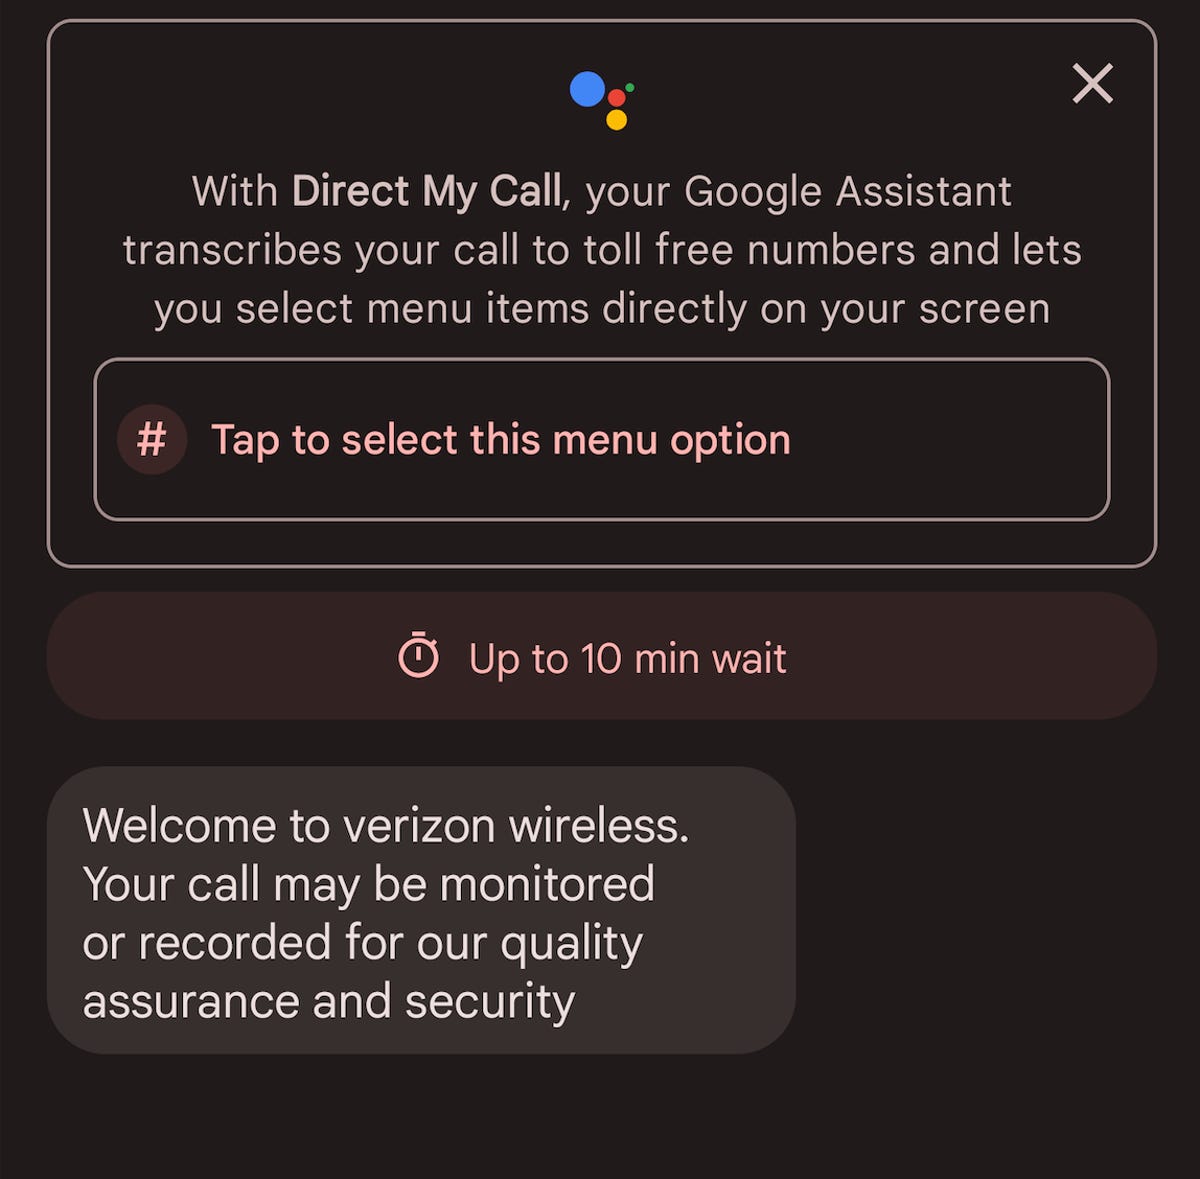 A screenshot showing Google's Direct My Call feature